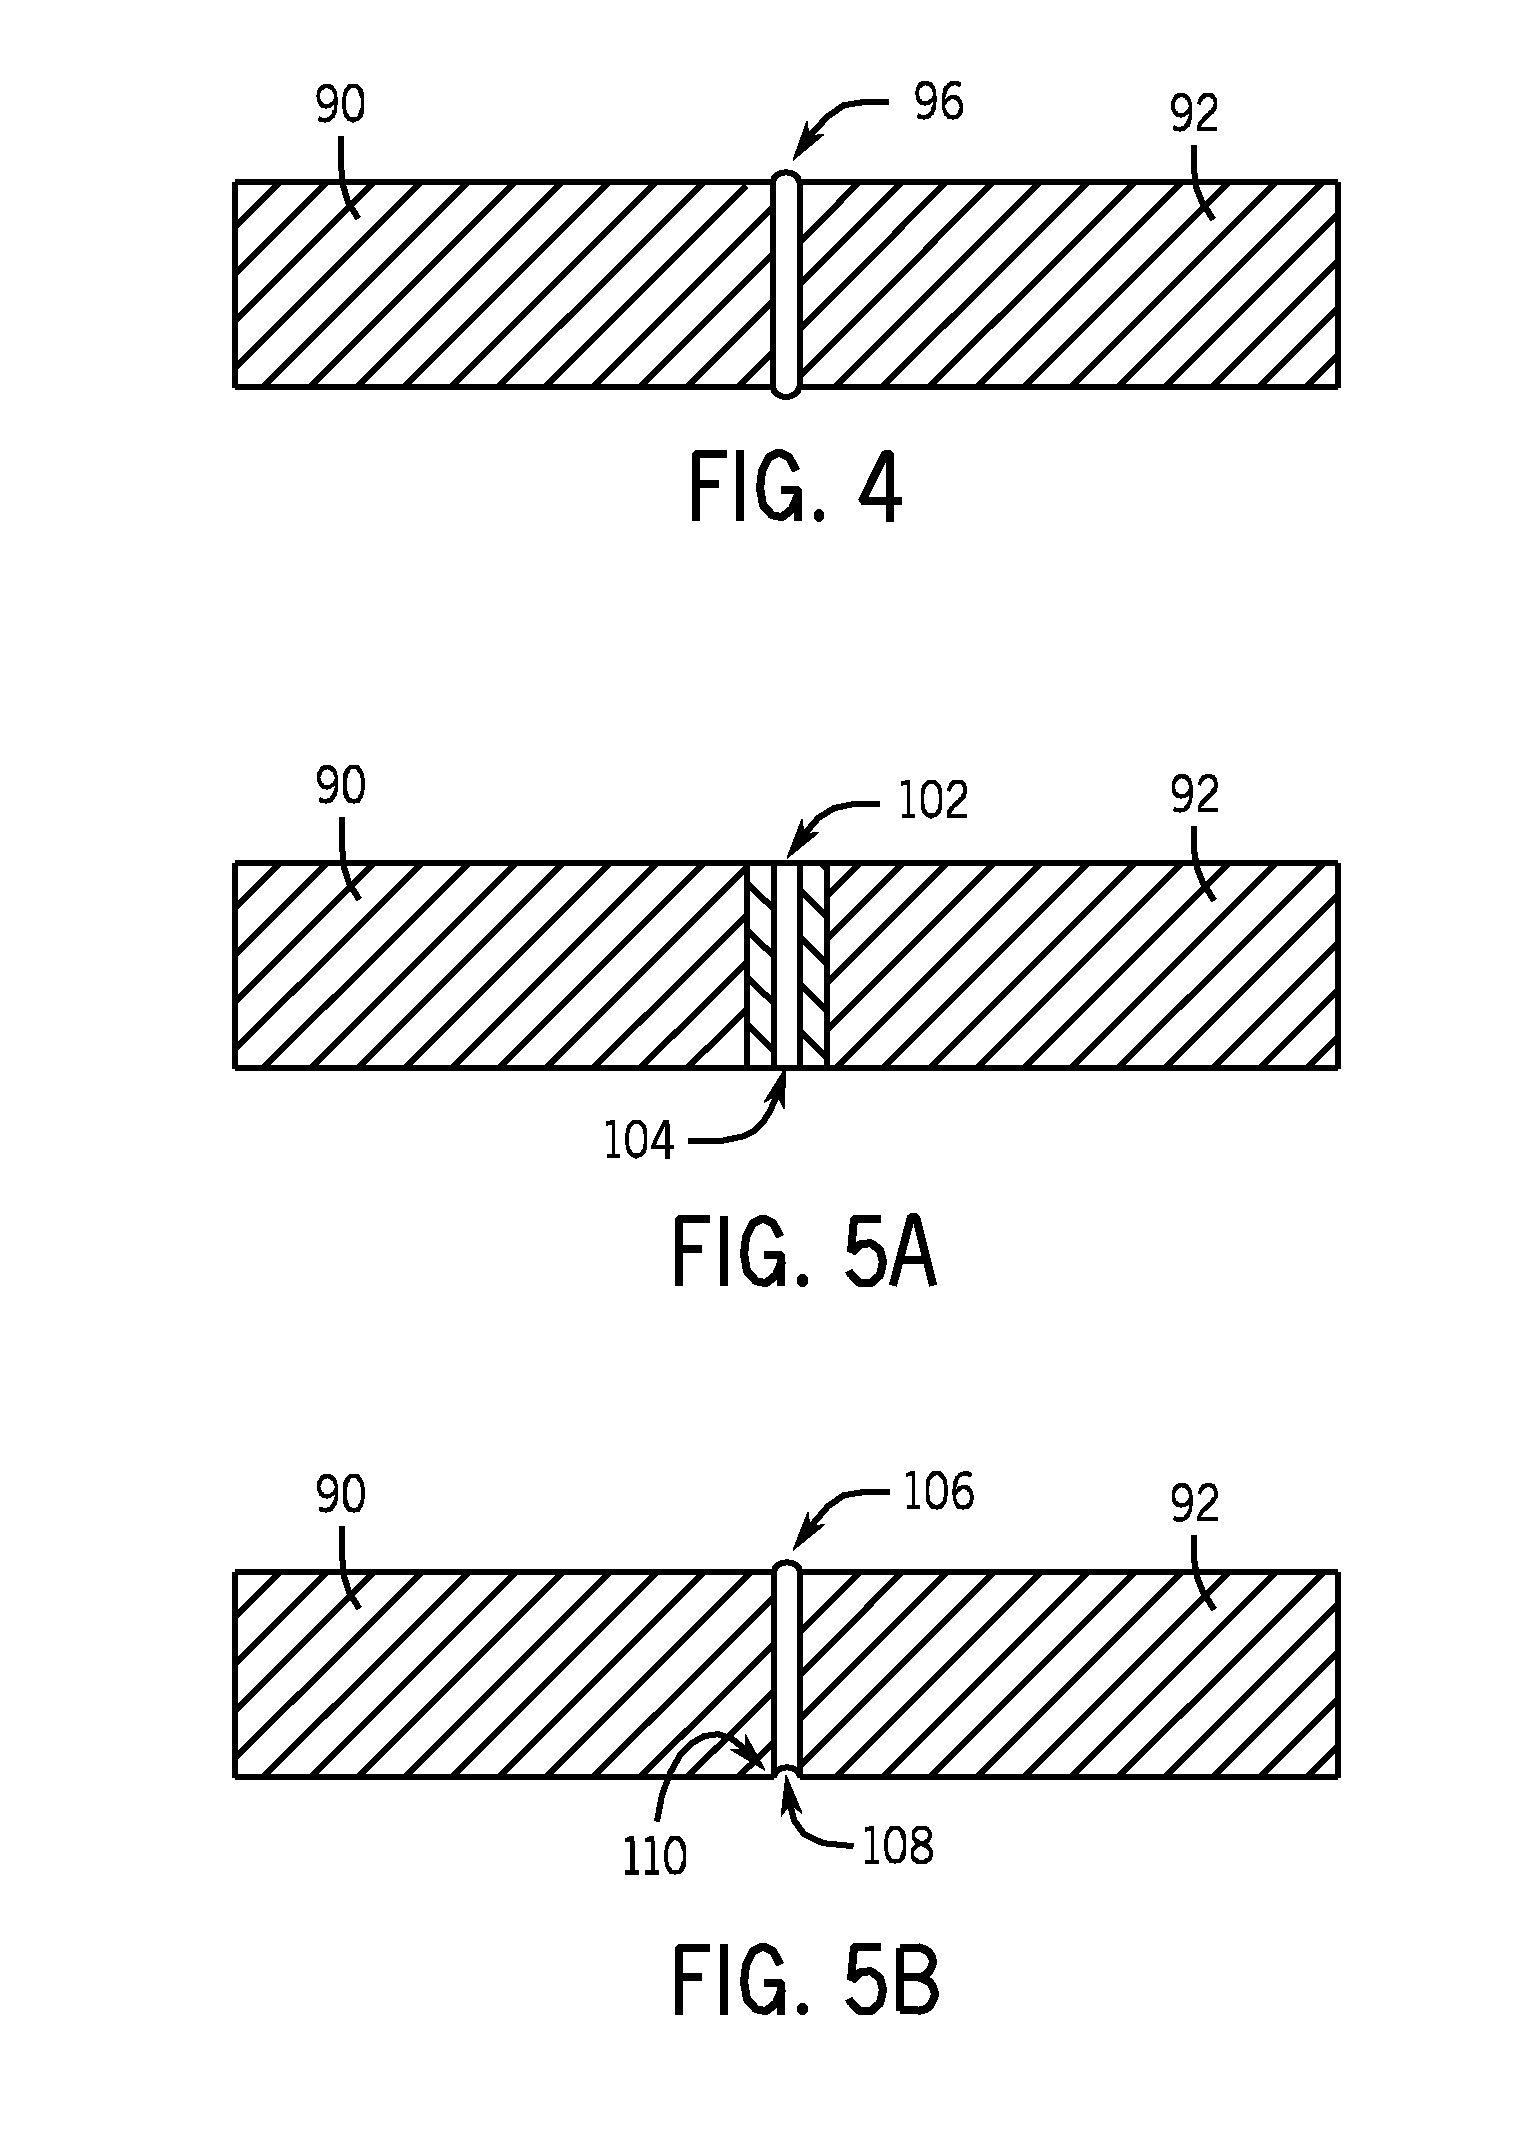 Weld defect detection systems and methods for laser hybrid welding